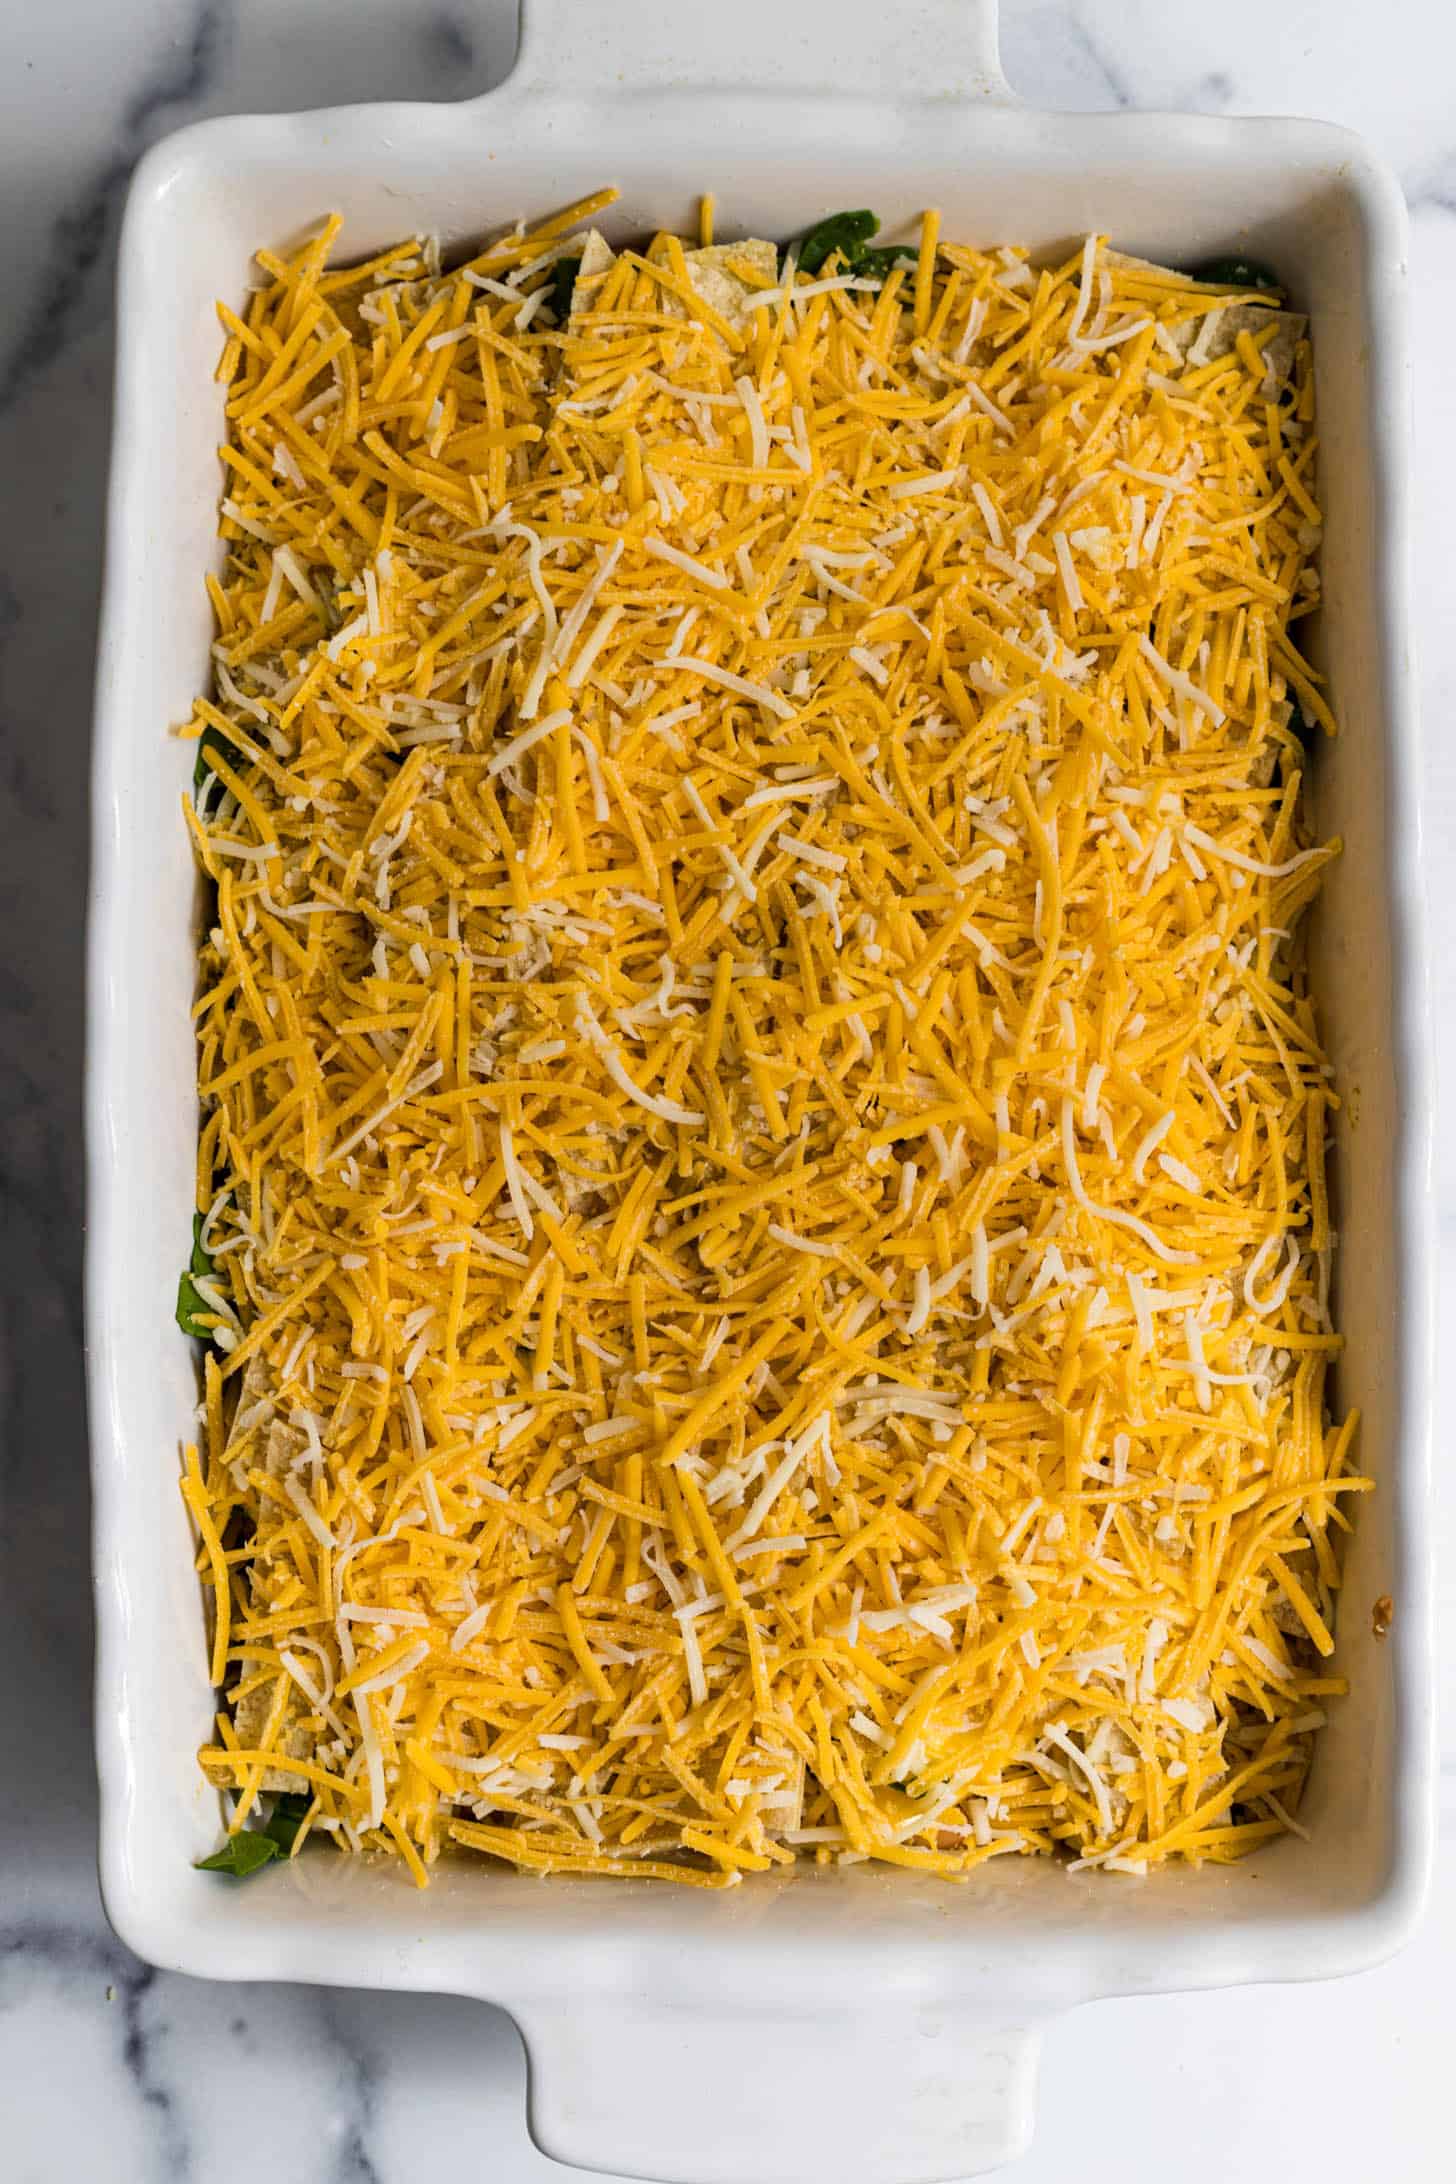 Assembled taco casserole in a baking dish that's ready to go in the oven.